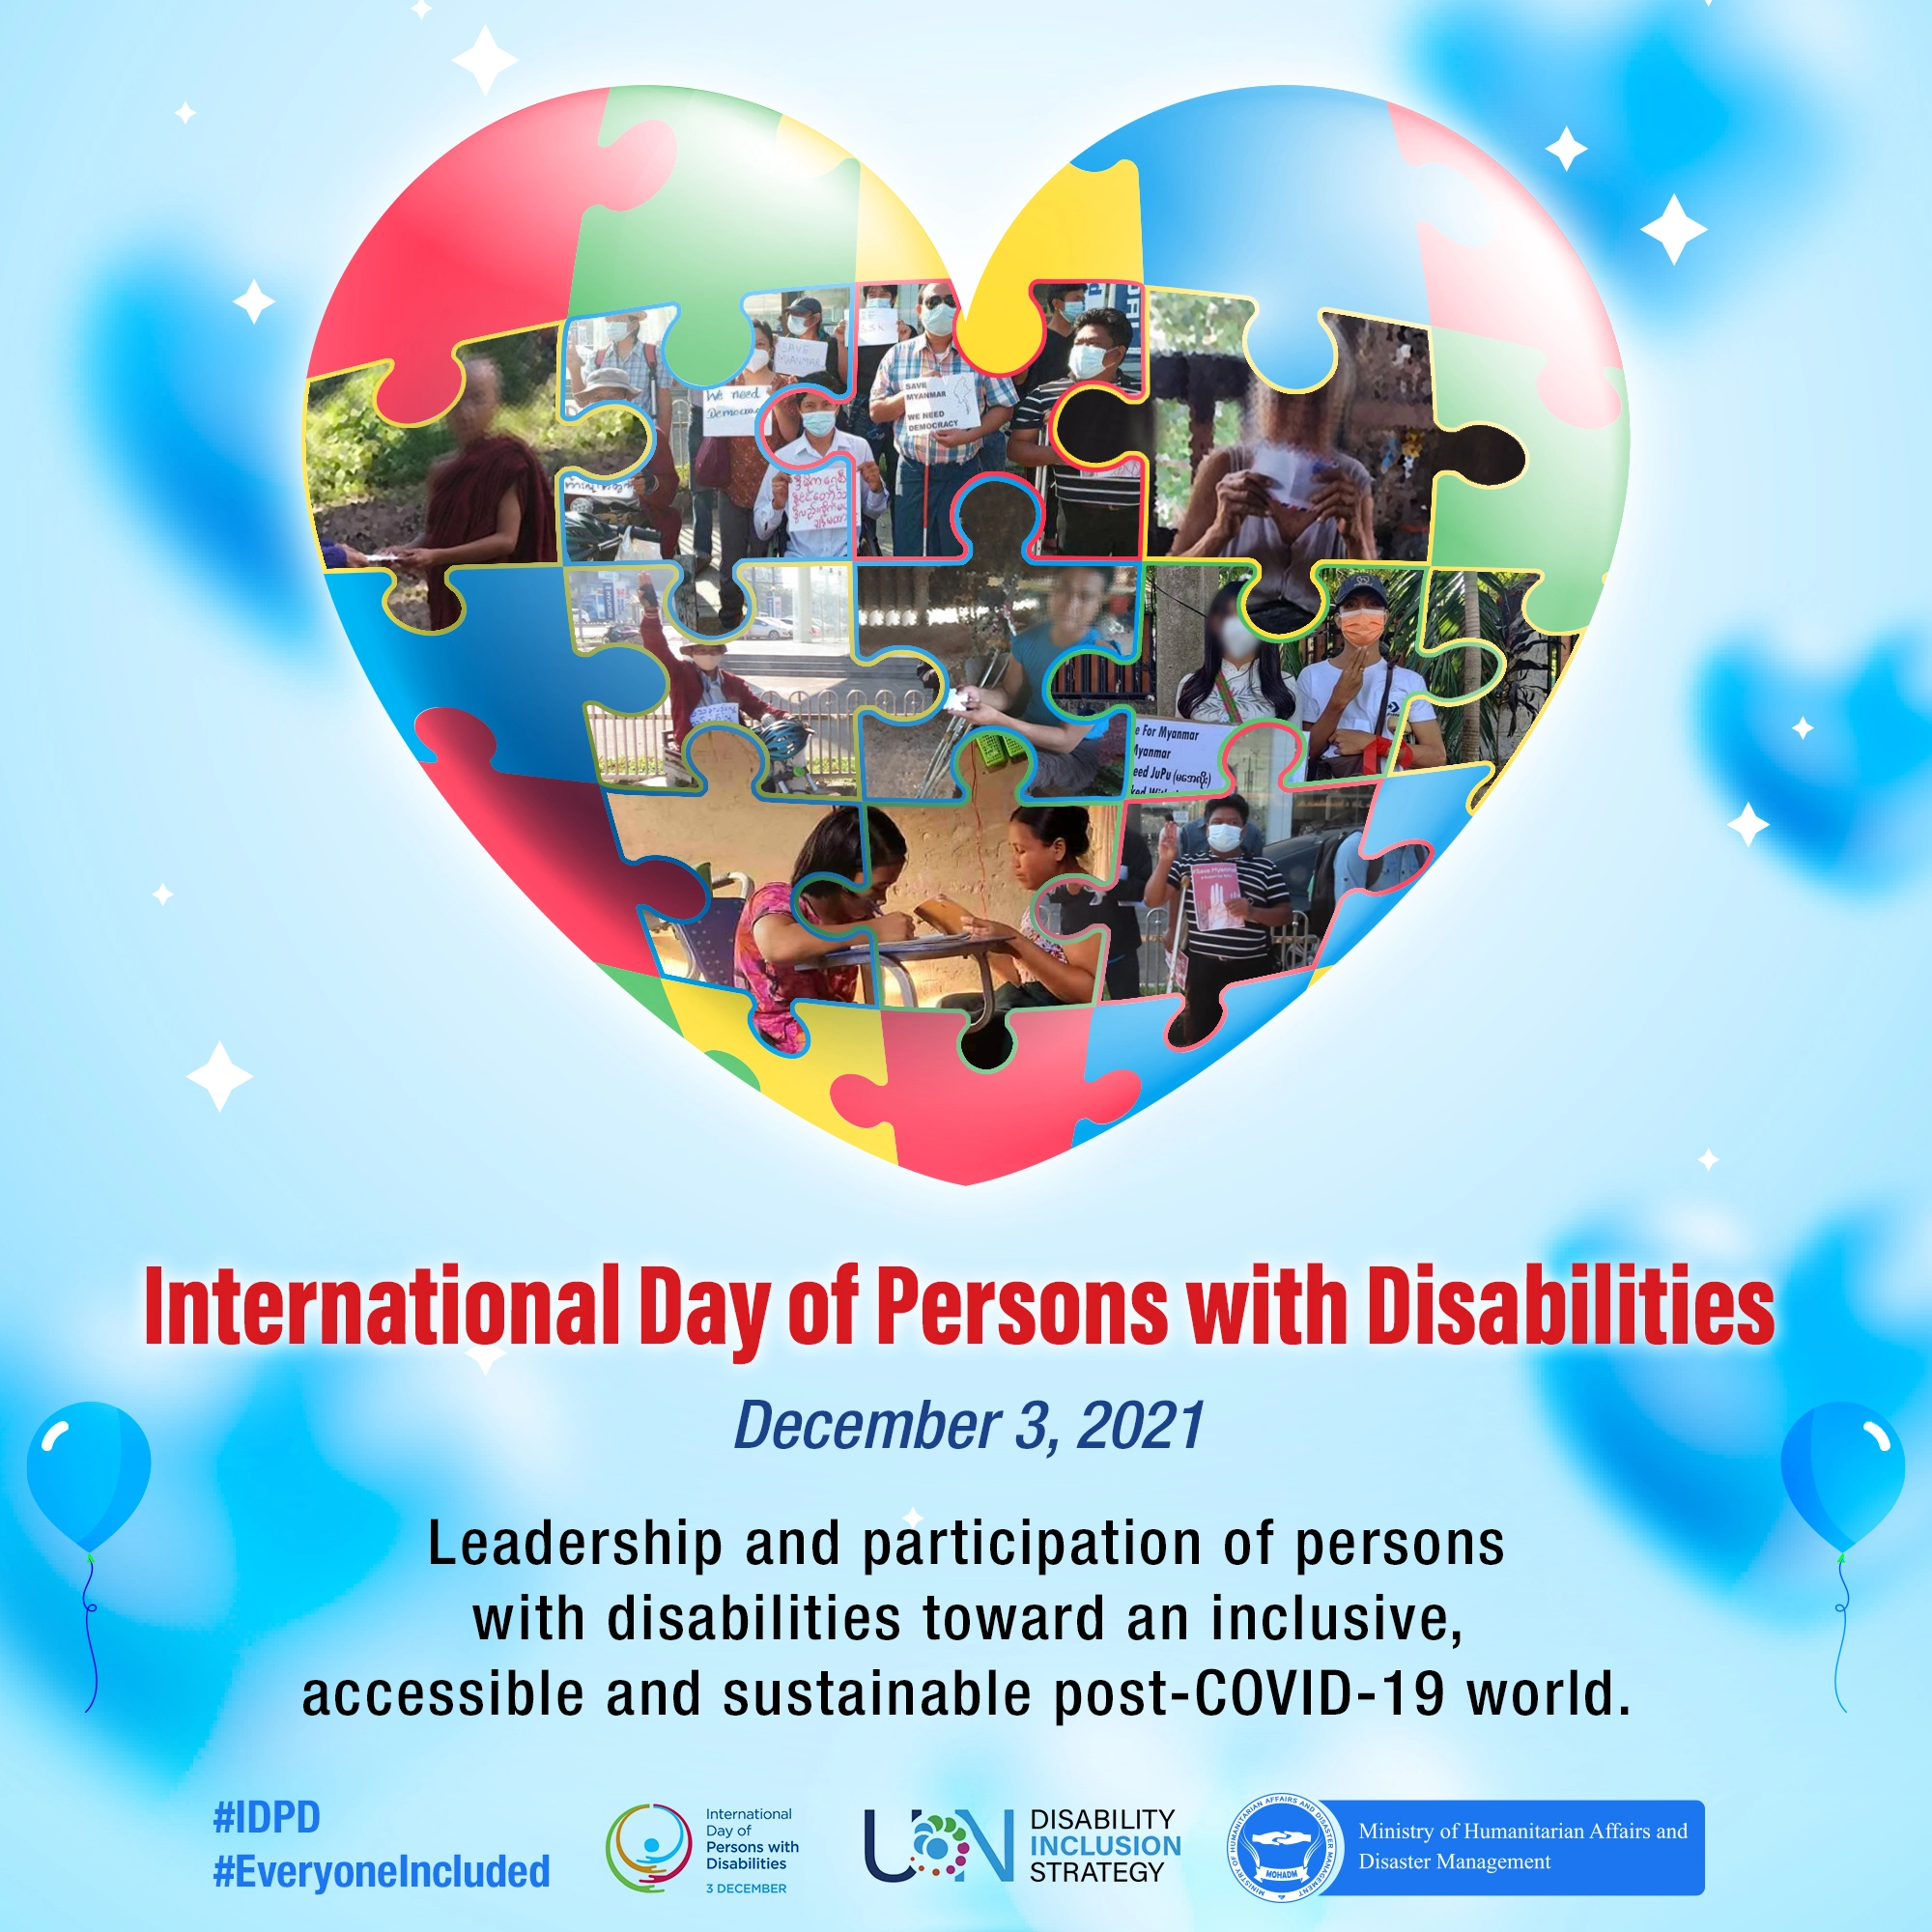 International Day of Persons with Disabilities (December 3)